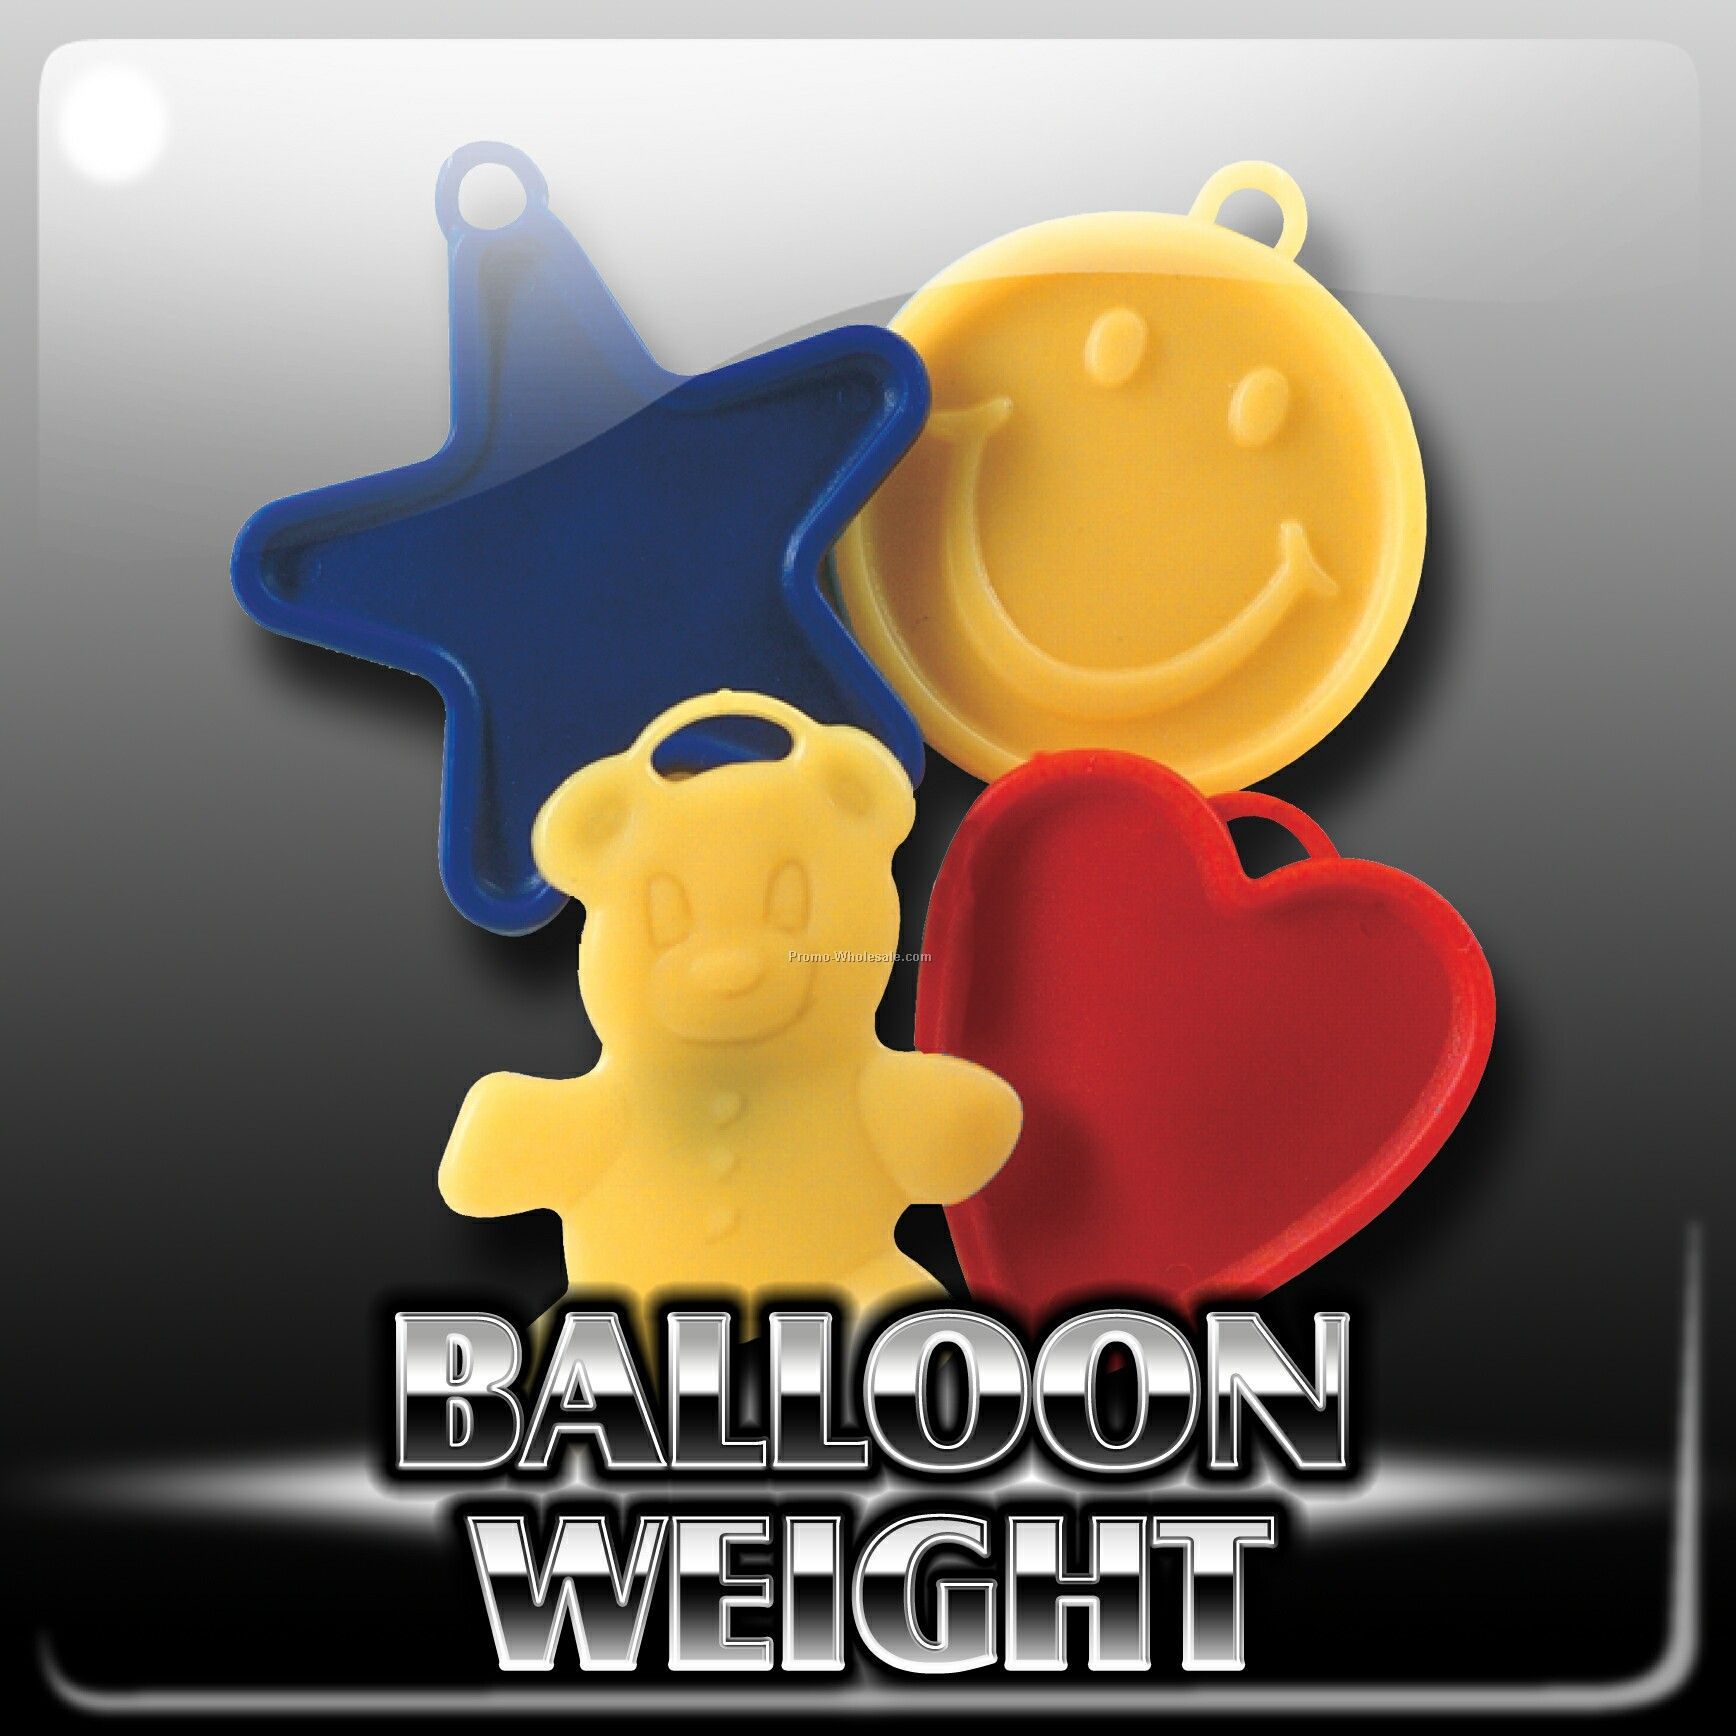 Balloon Weight - Assorted Shapes/Colors - 8g